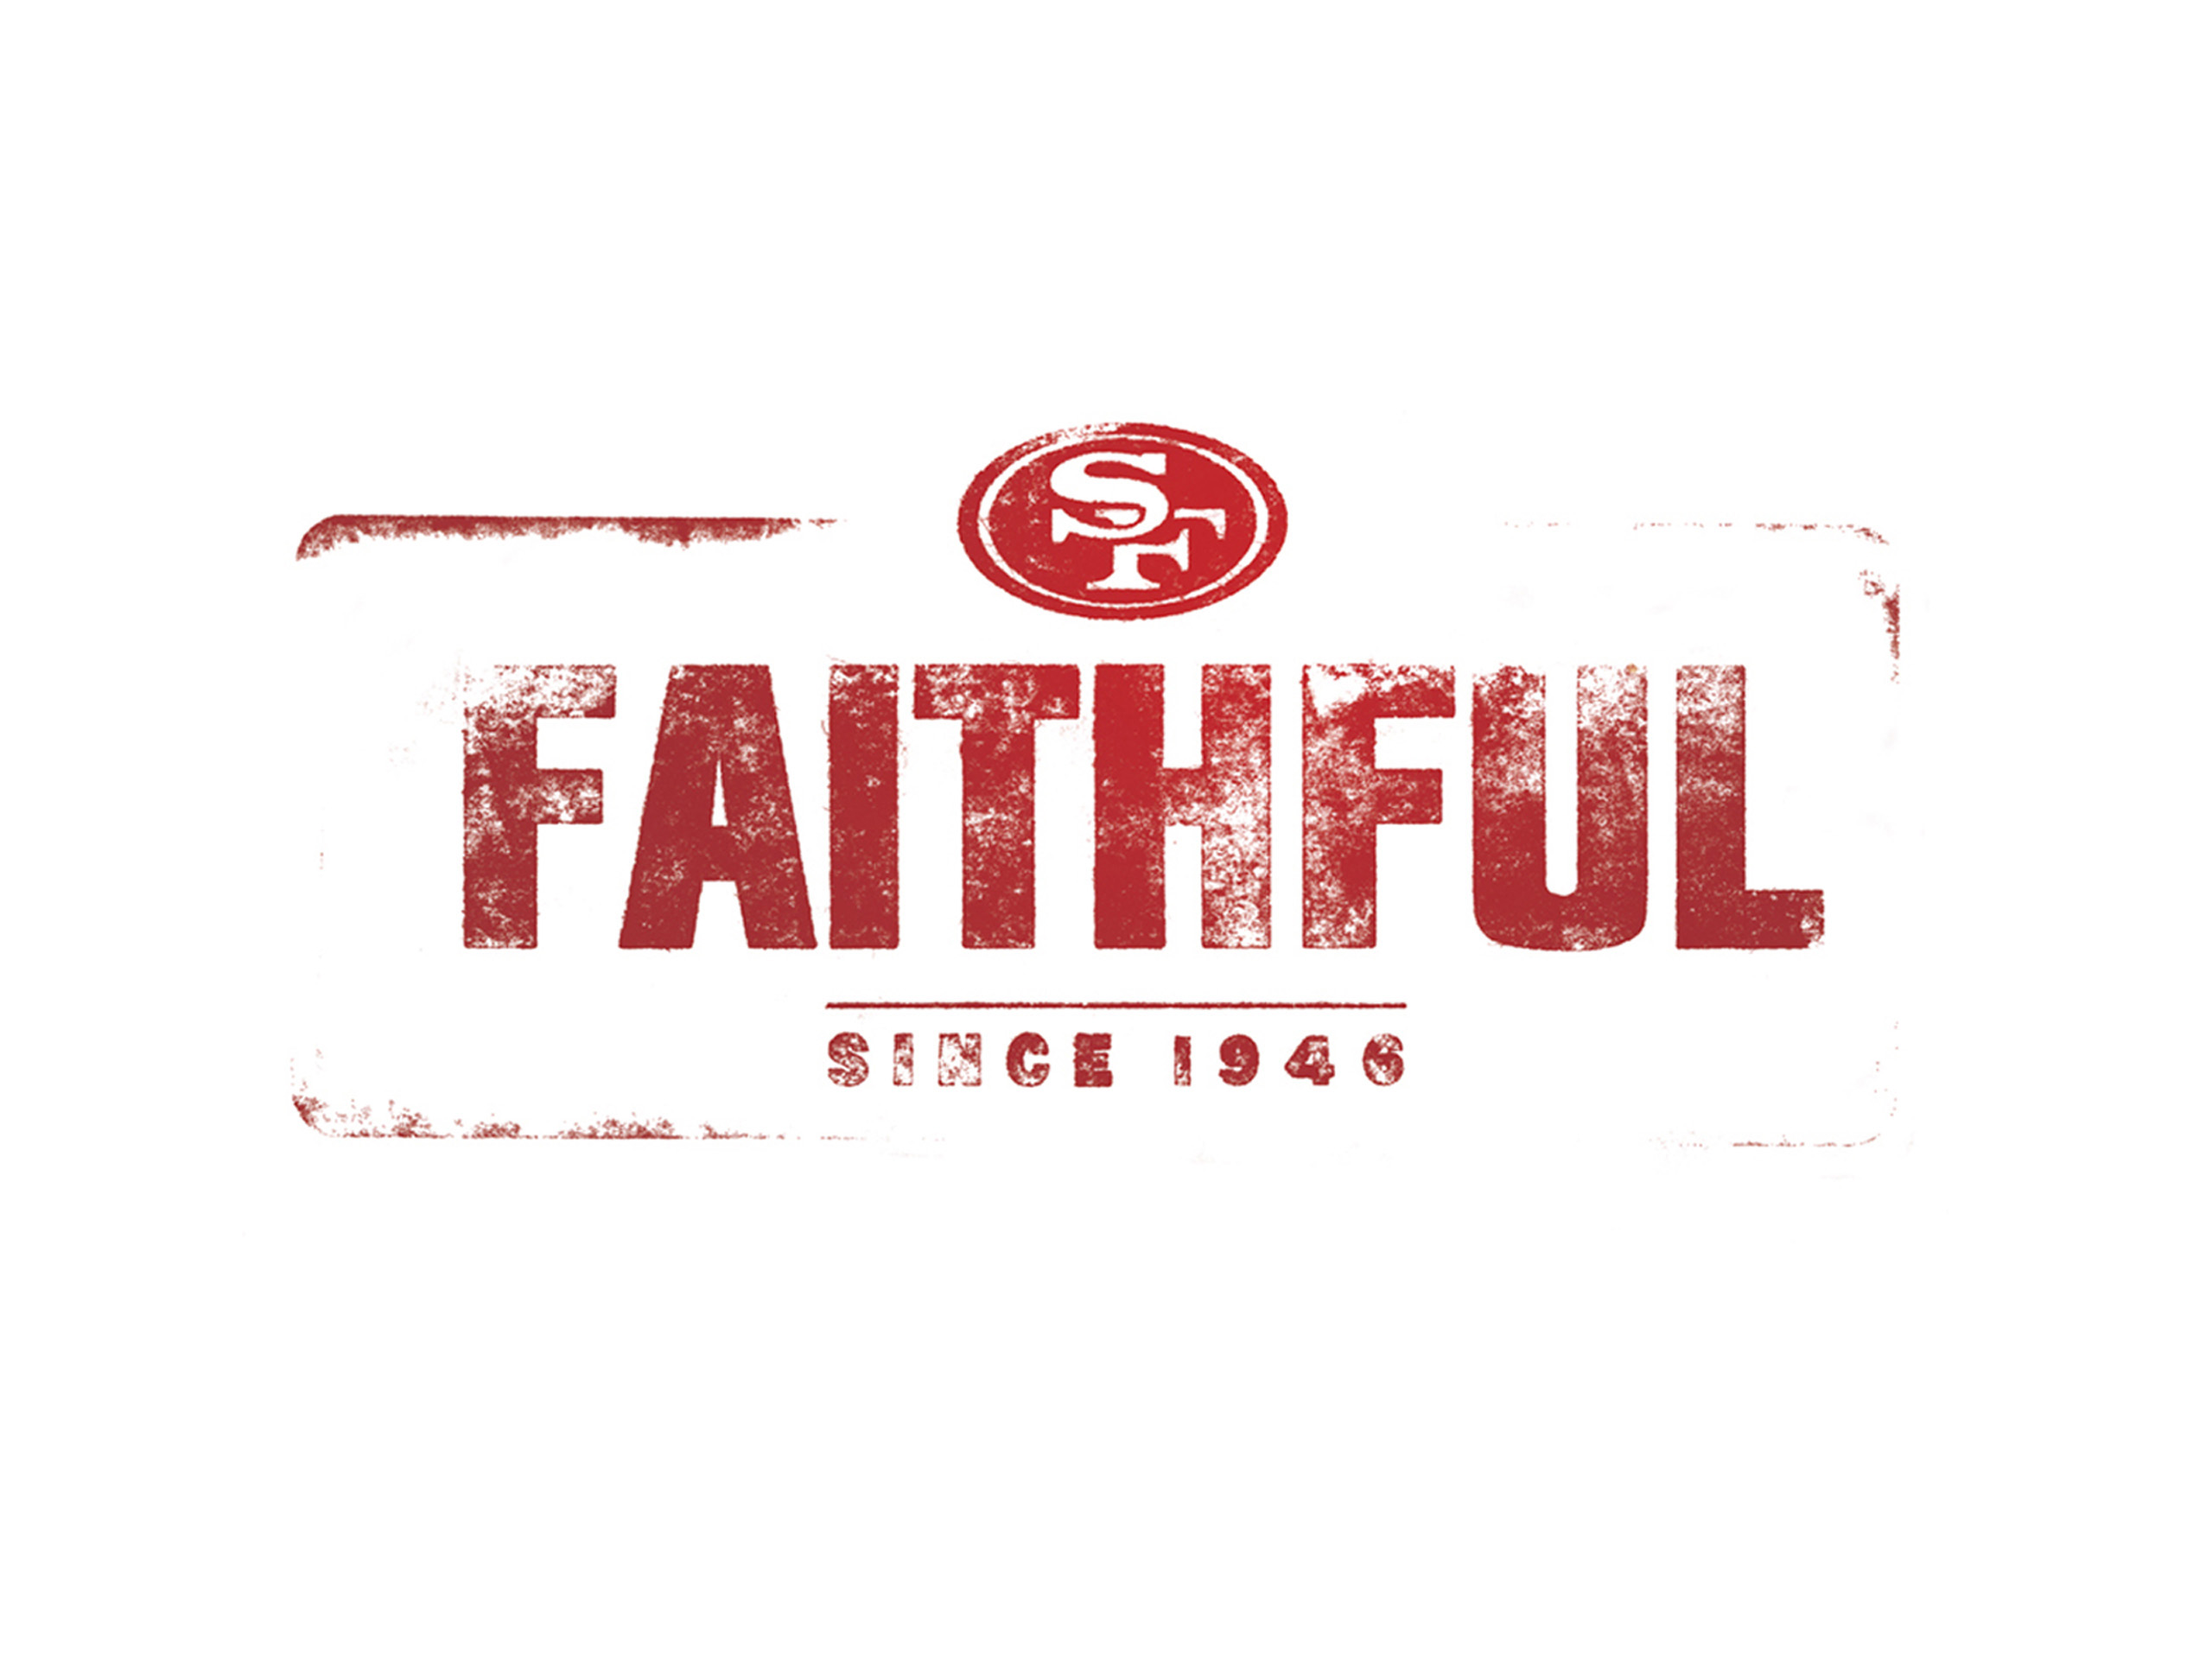 49ers and sf giants wallpaper